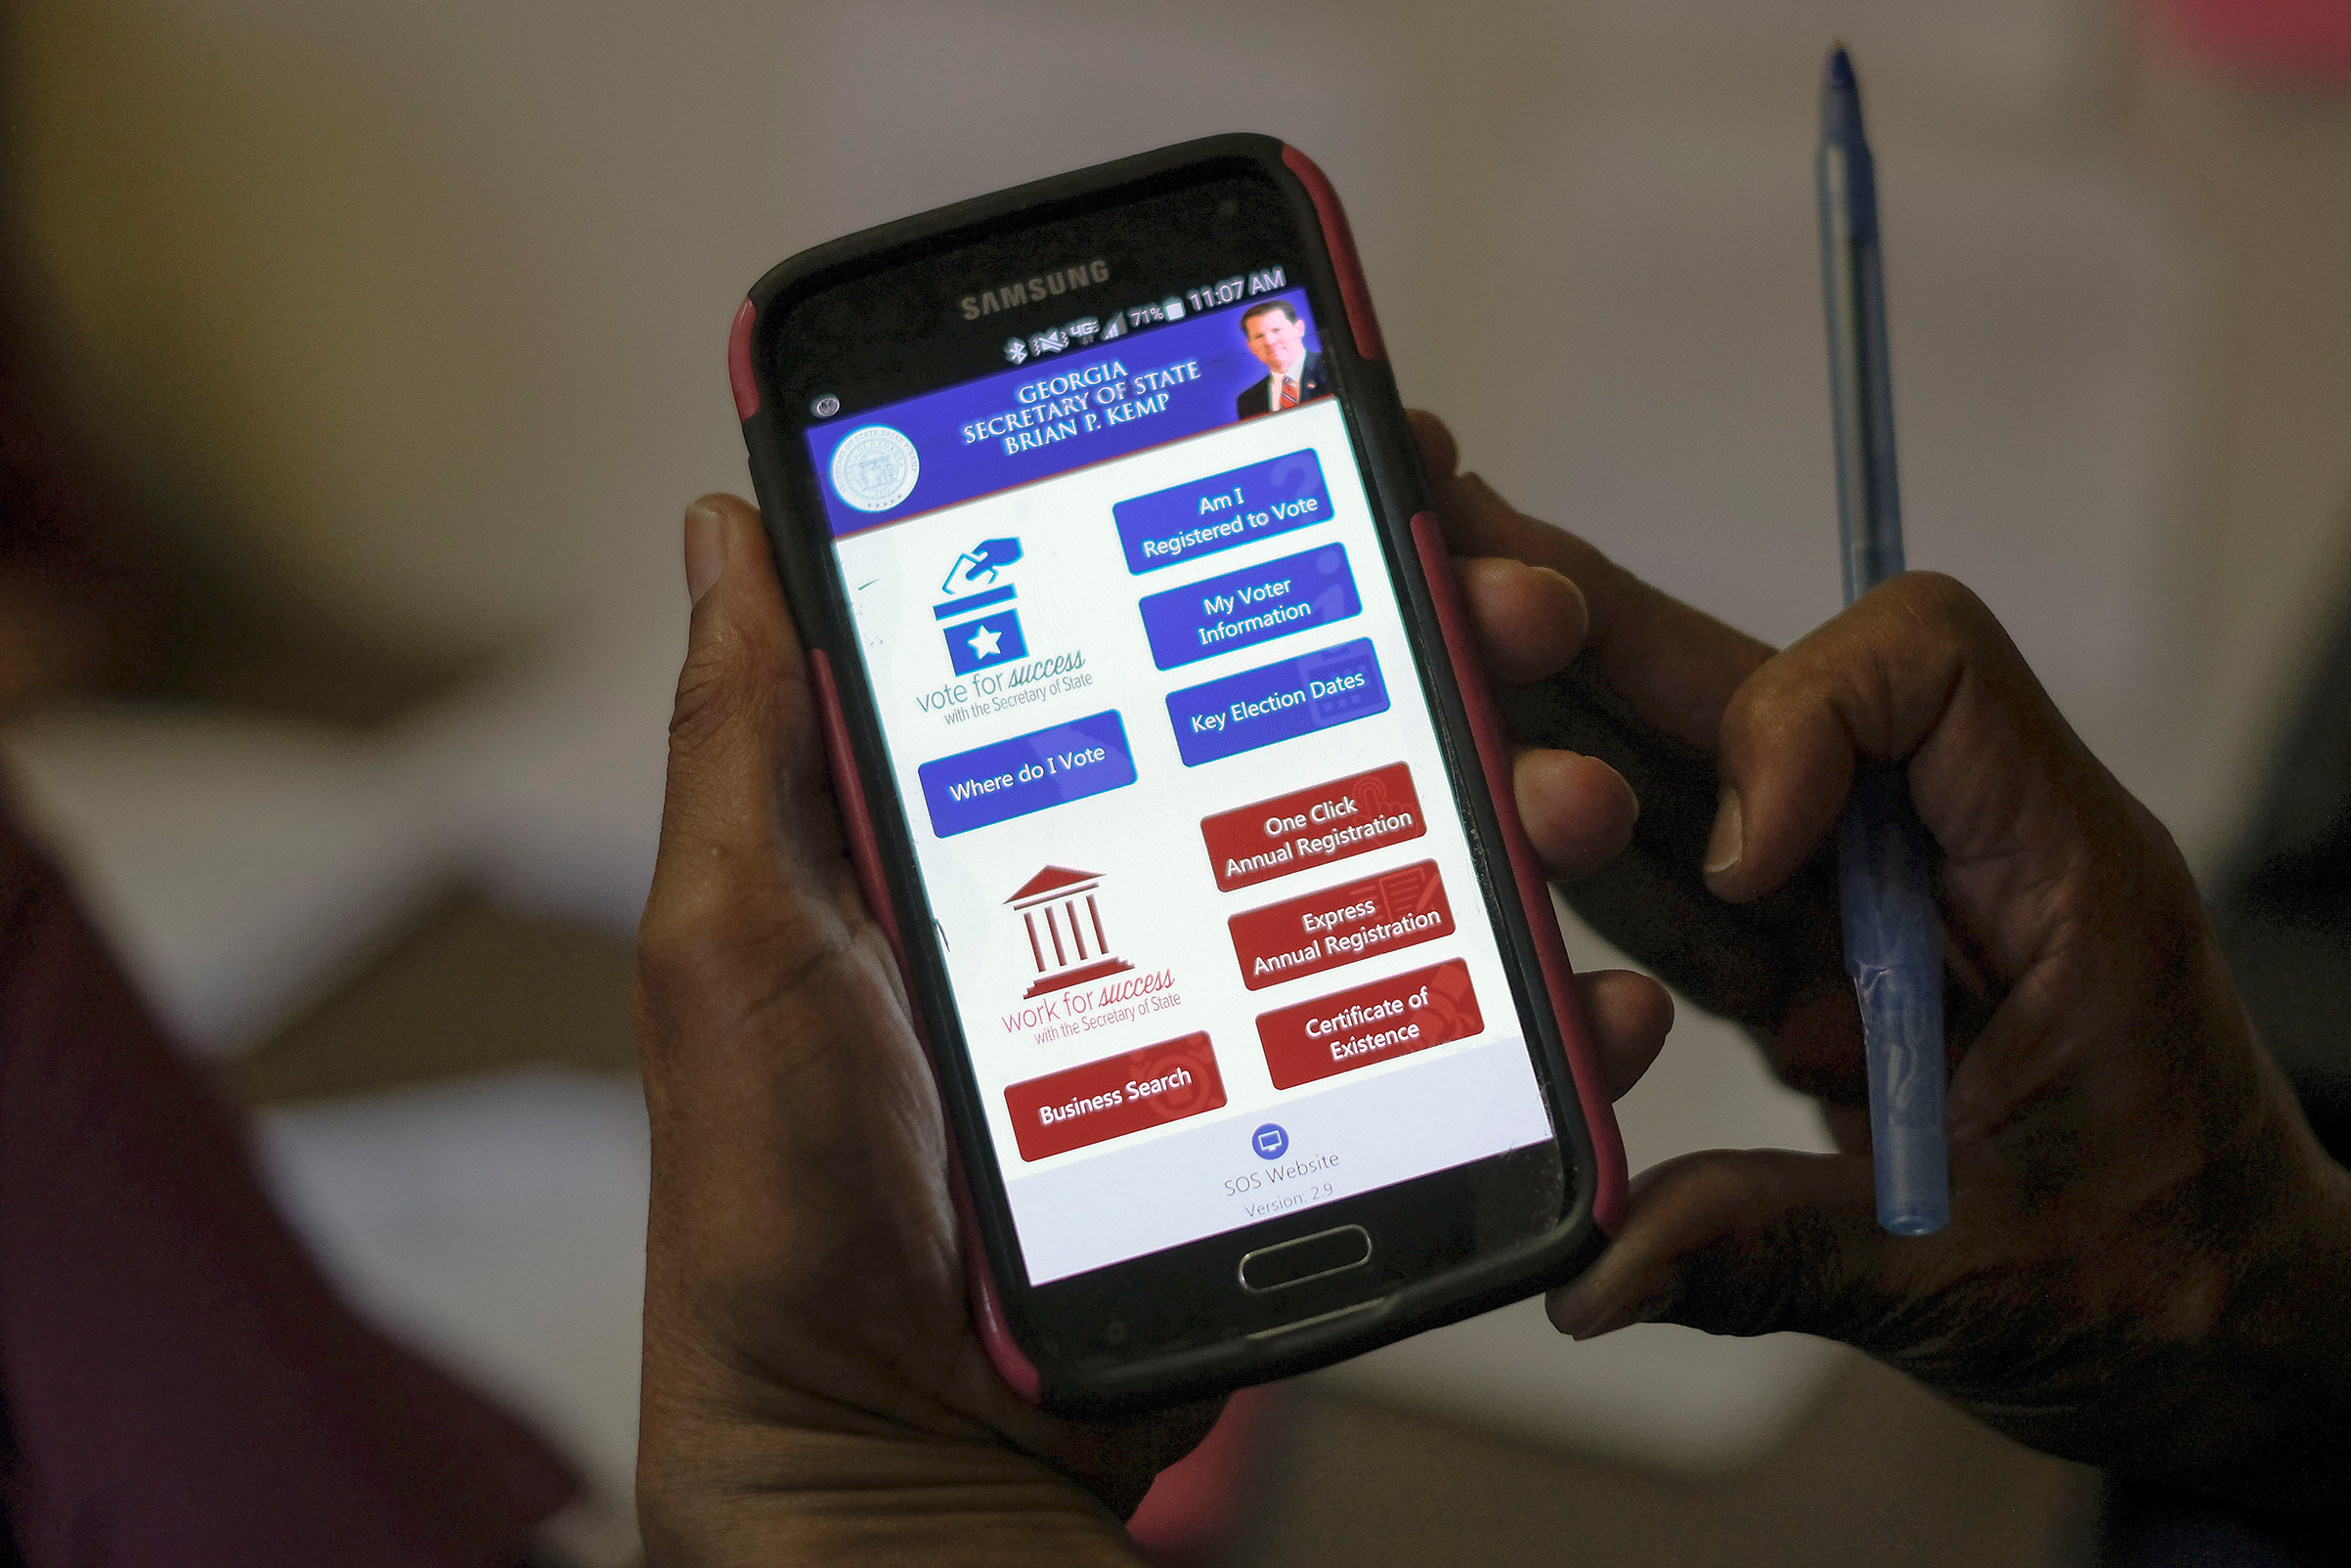 The Georgia SOS app is used by members of Women on the Move to confirm registration and polling precincts with callers at the Urban League of Greater Columbus in Columbus, Ga. on election day, Nov. 6, 2018. (Gabriella Demczuk for TIME)